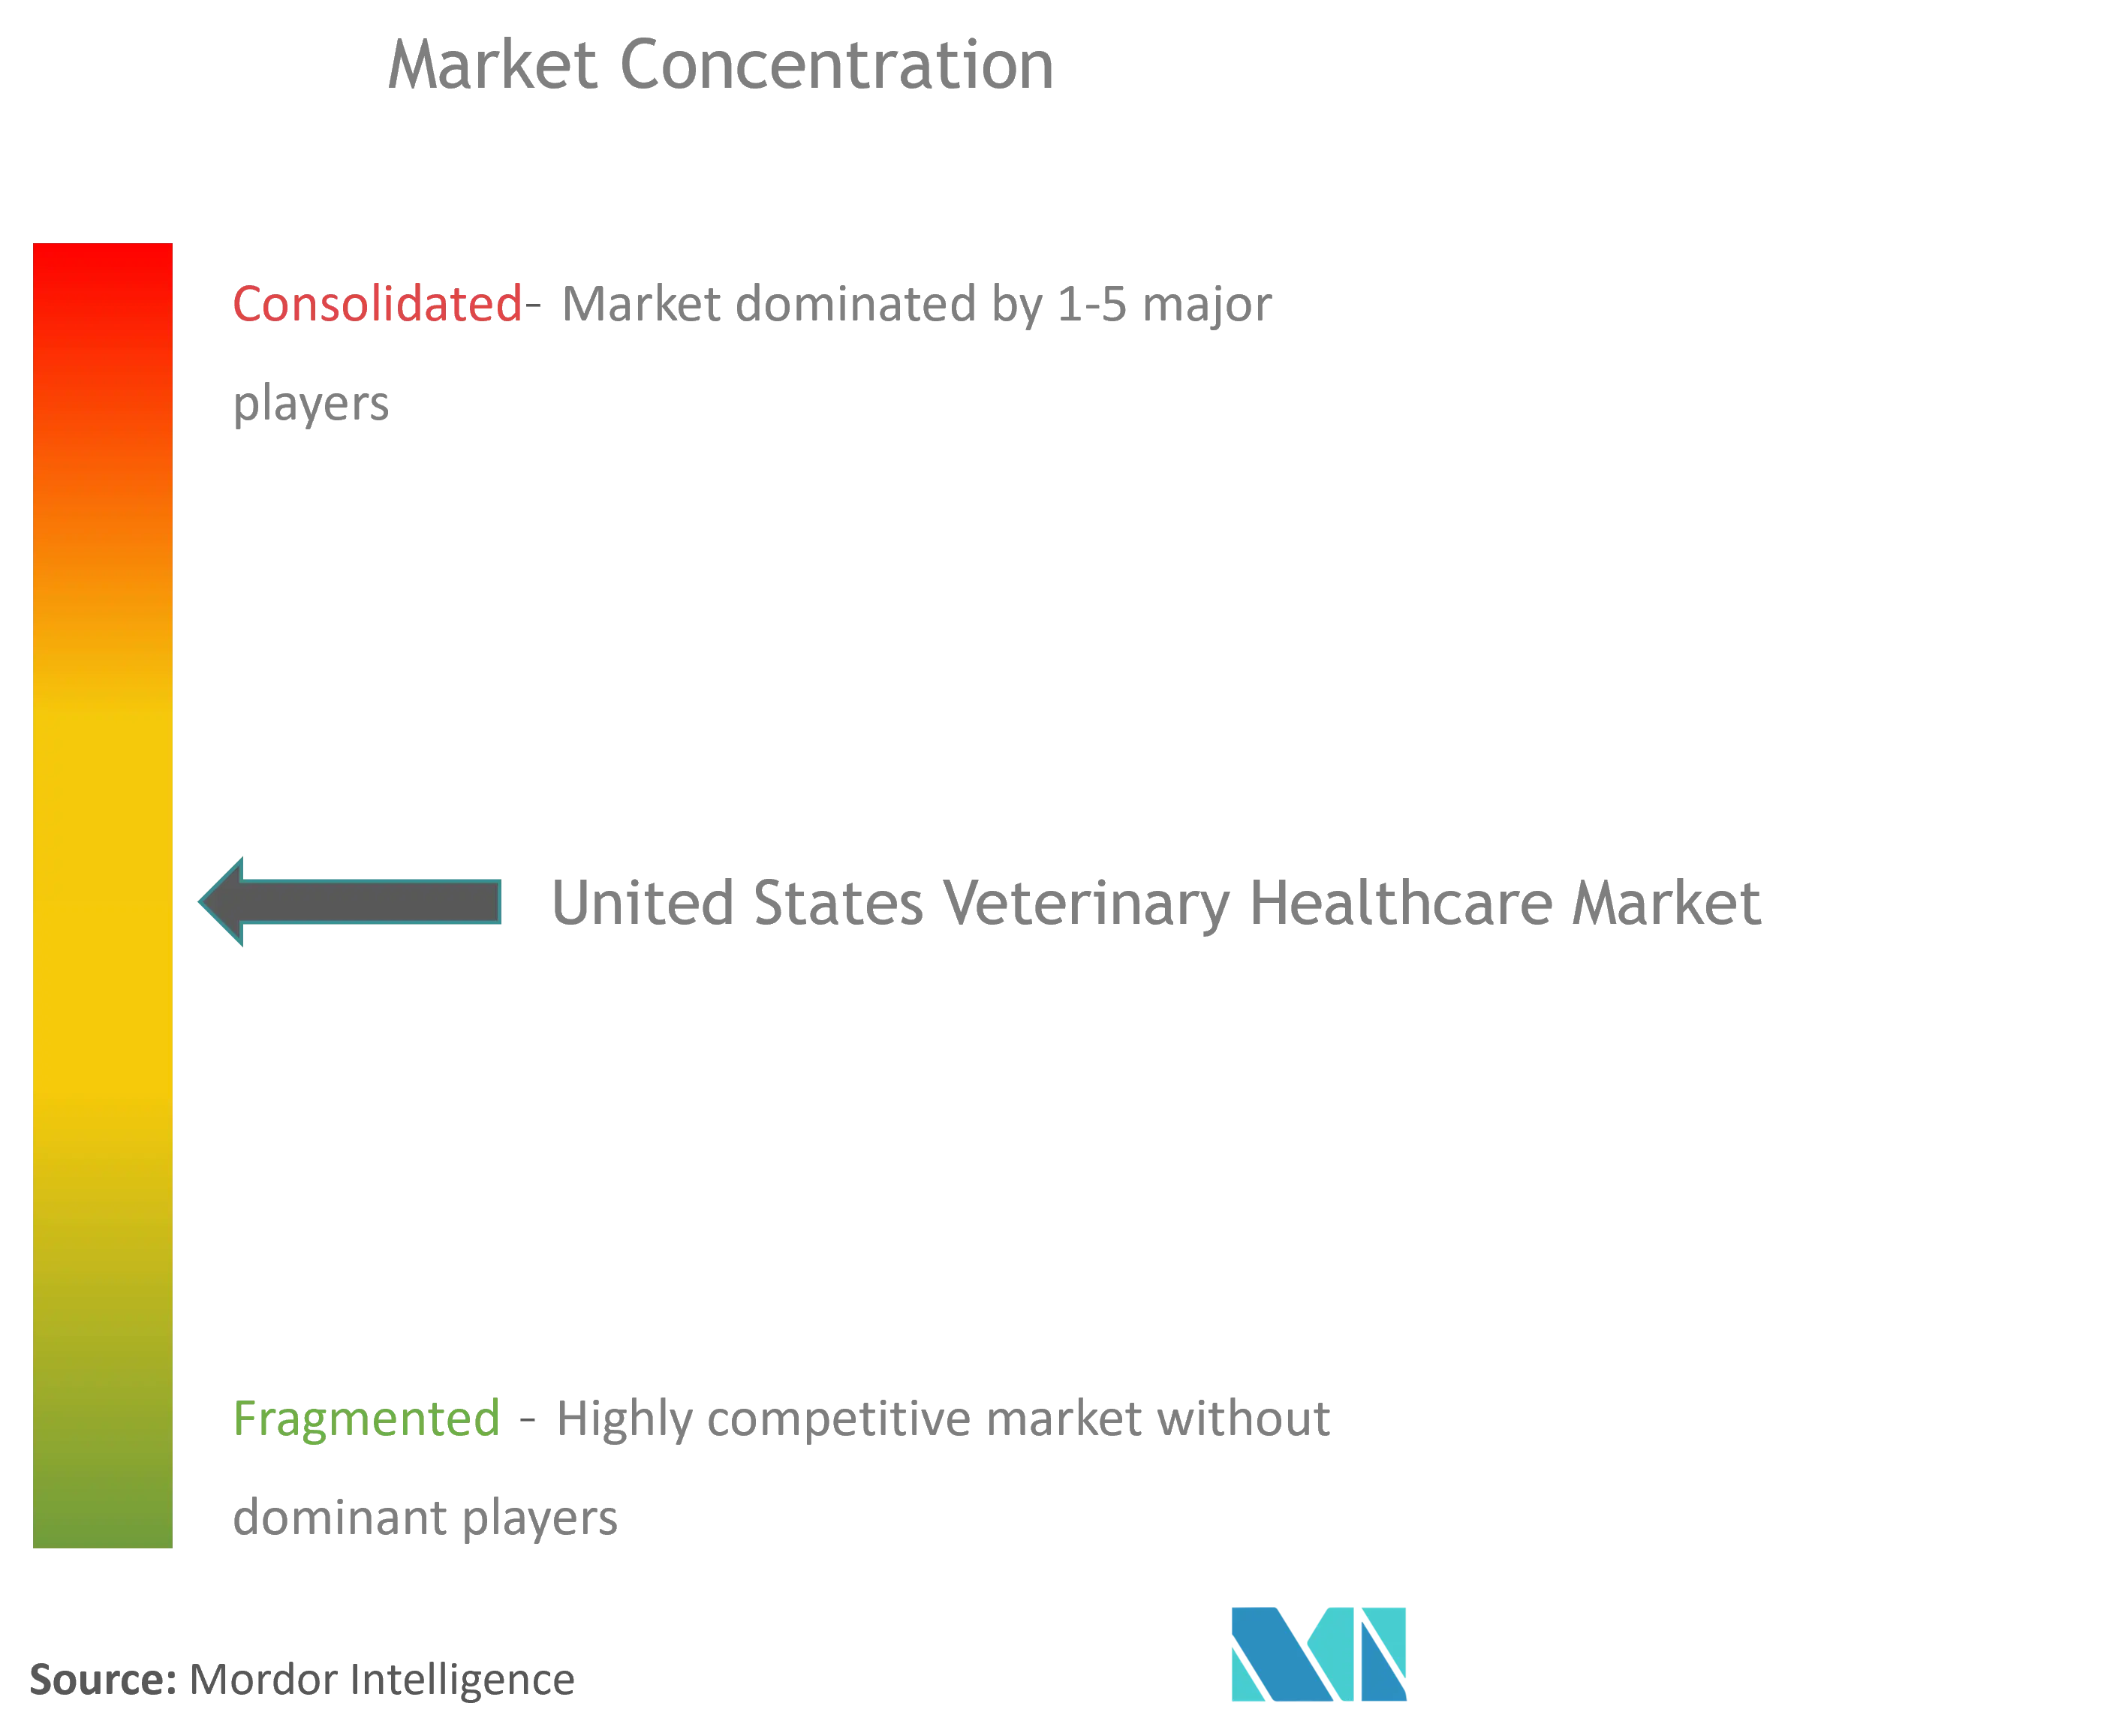 United States Veterinary Healthcare Market Concentration